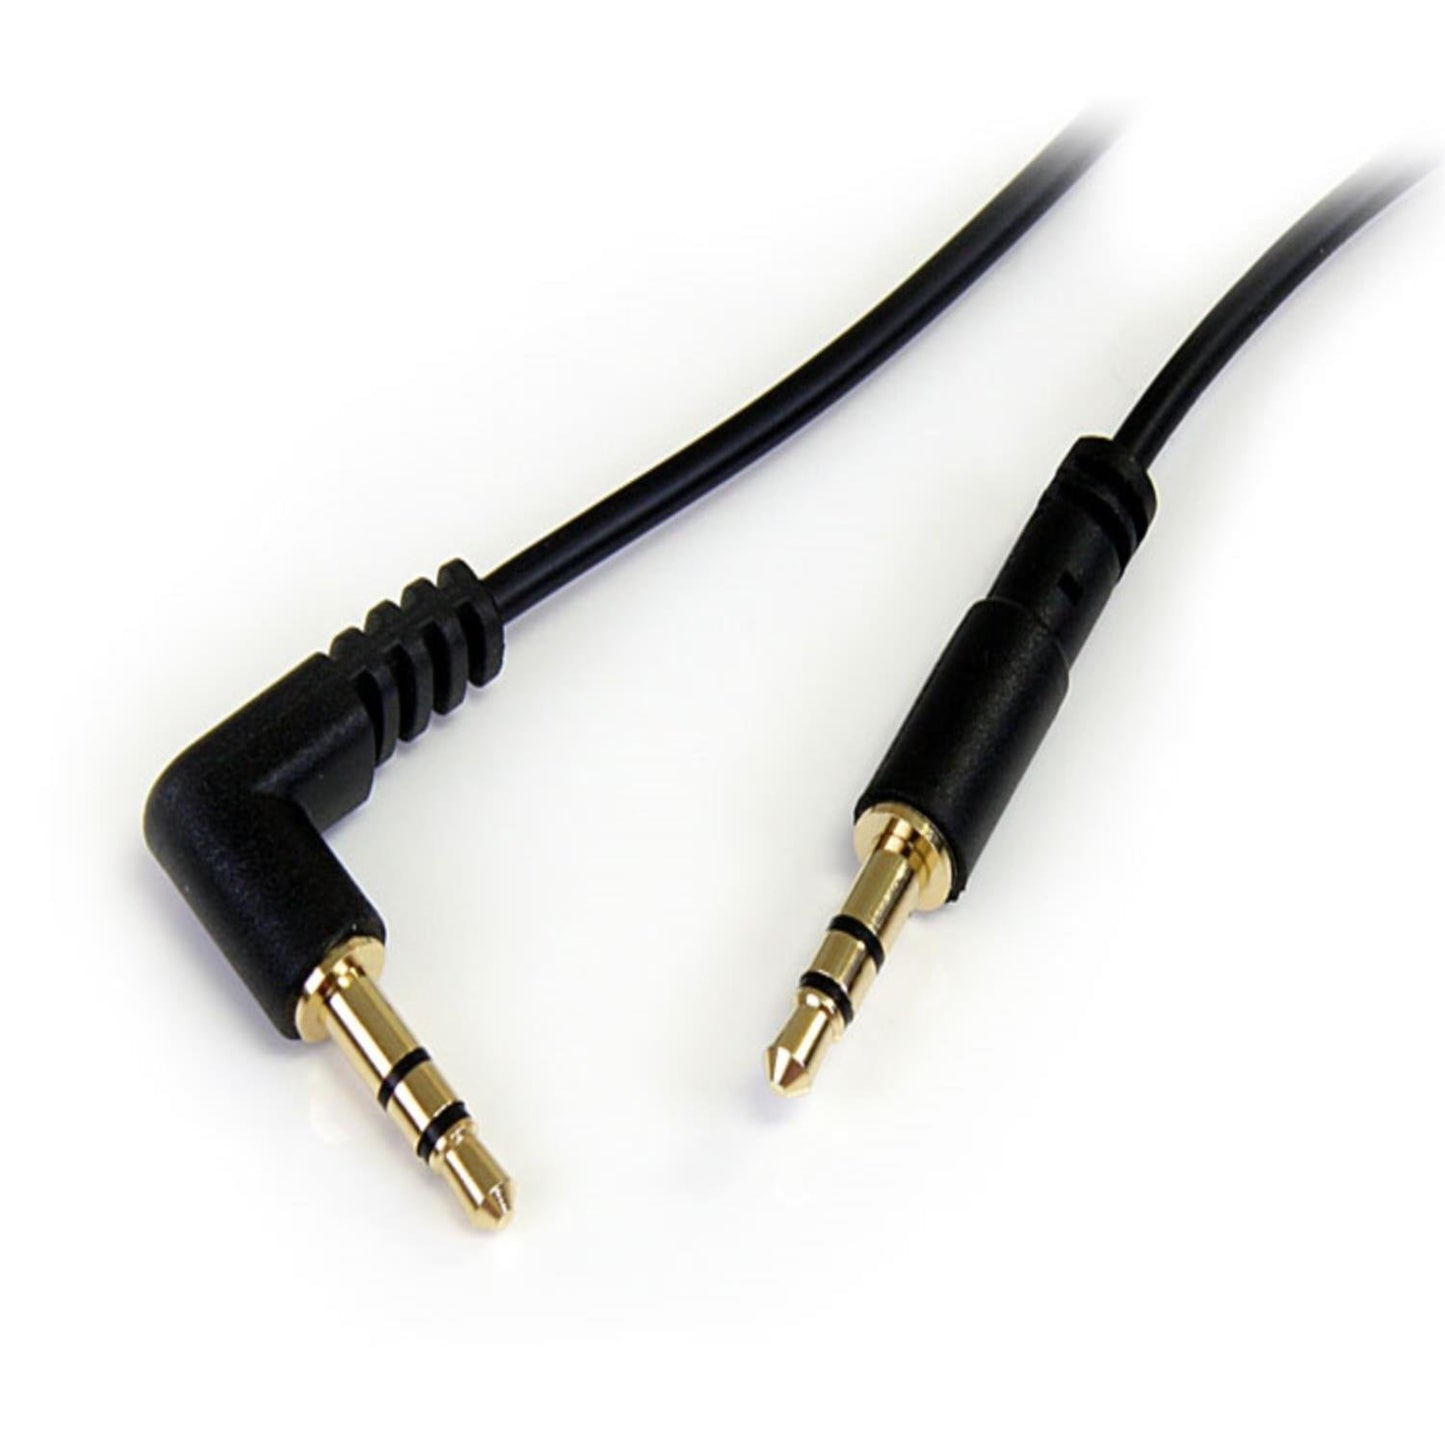 Stereo 3.5mm Male to 3.5mm Male Audio Cable w/ 90-degree Angle, 6 ft - CBA-MM90